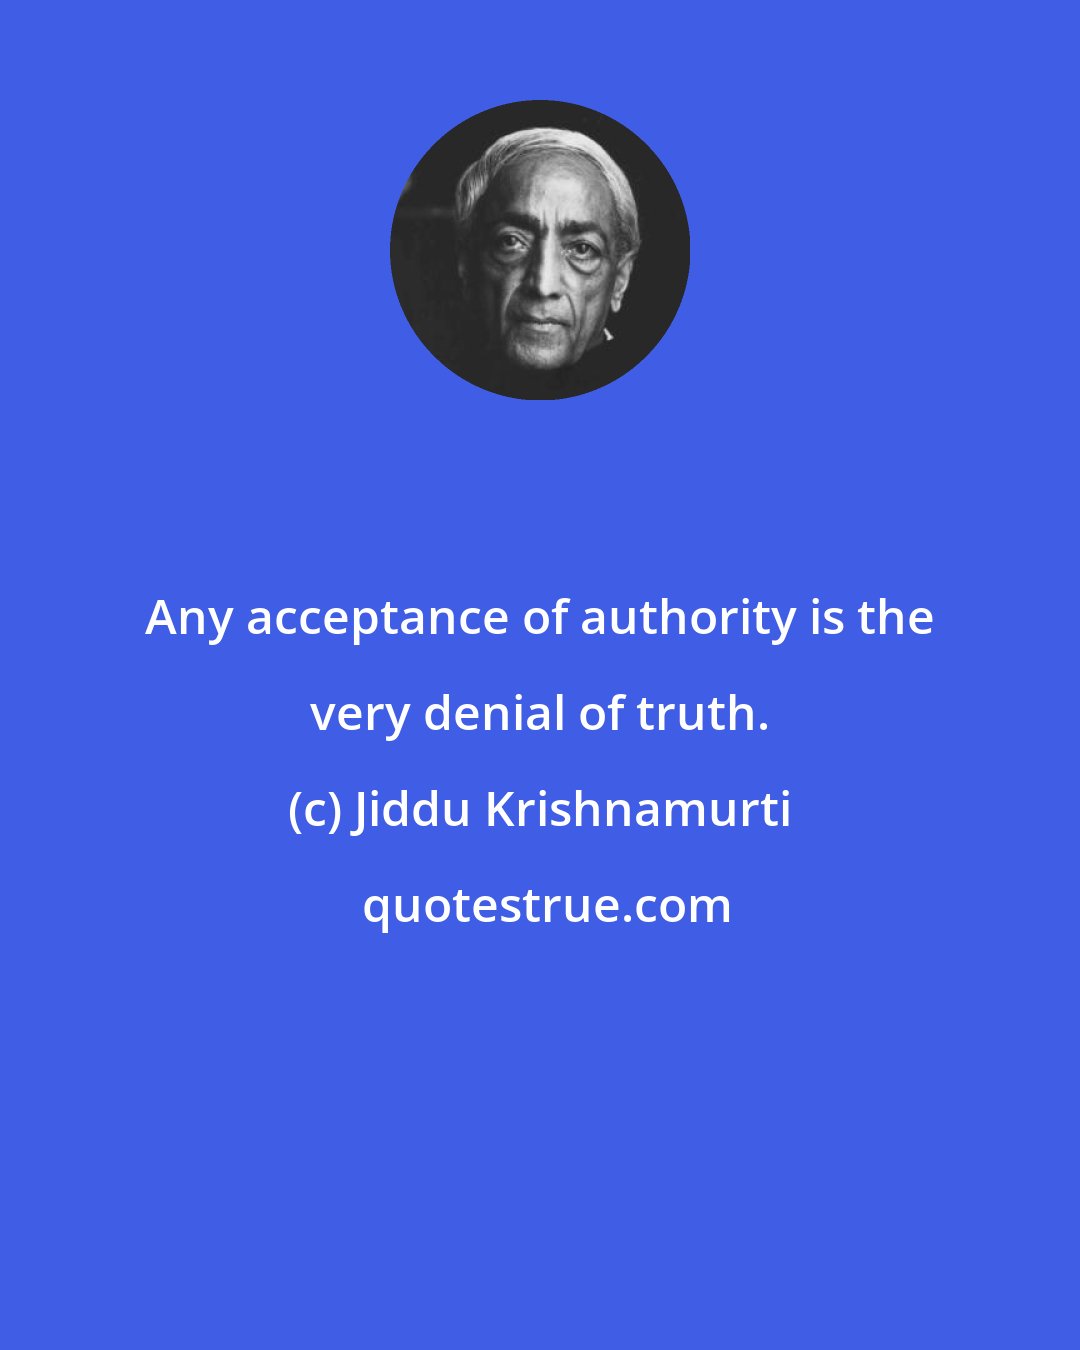 Jiddu Krishnamurti: Any acceptance of authority is the very denial of truth.